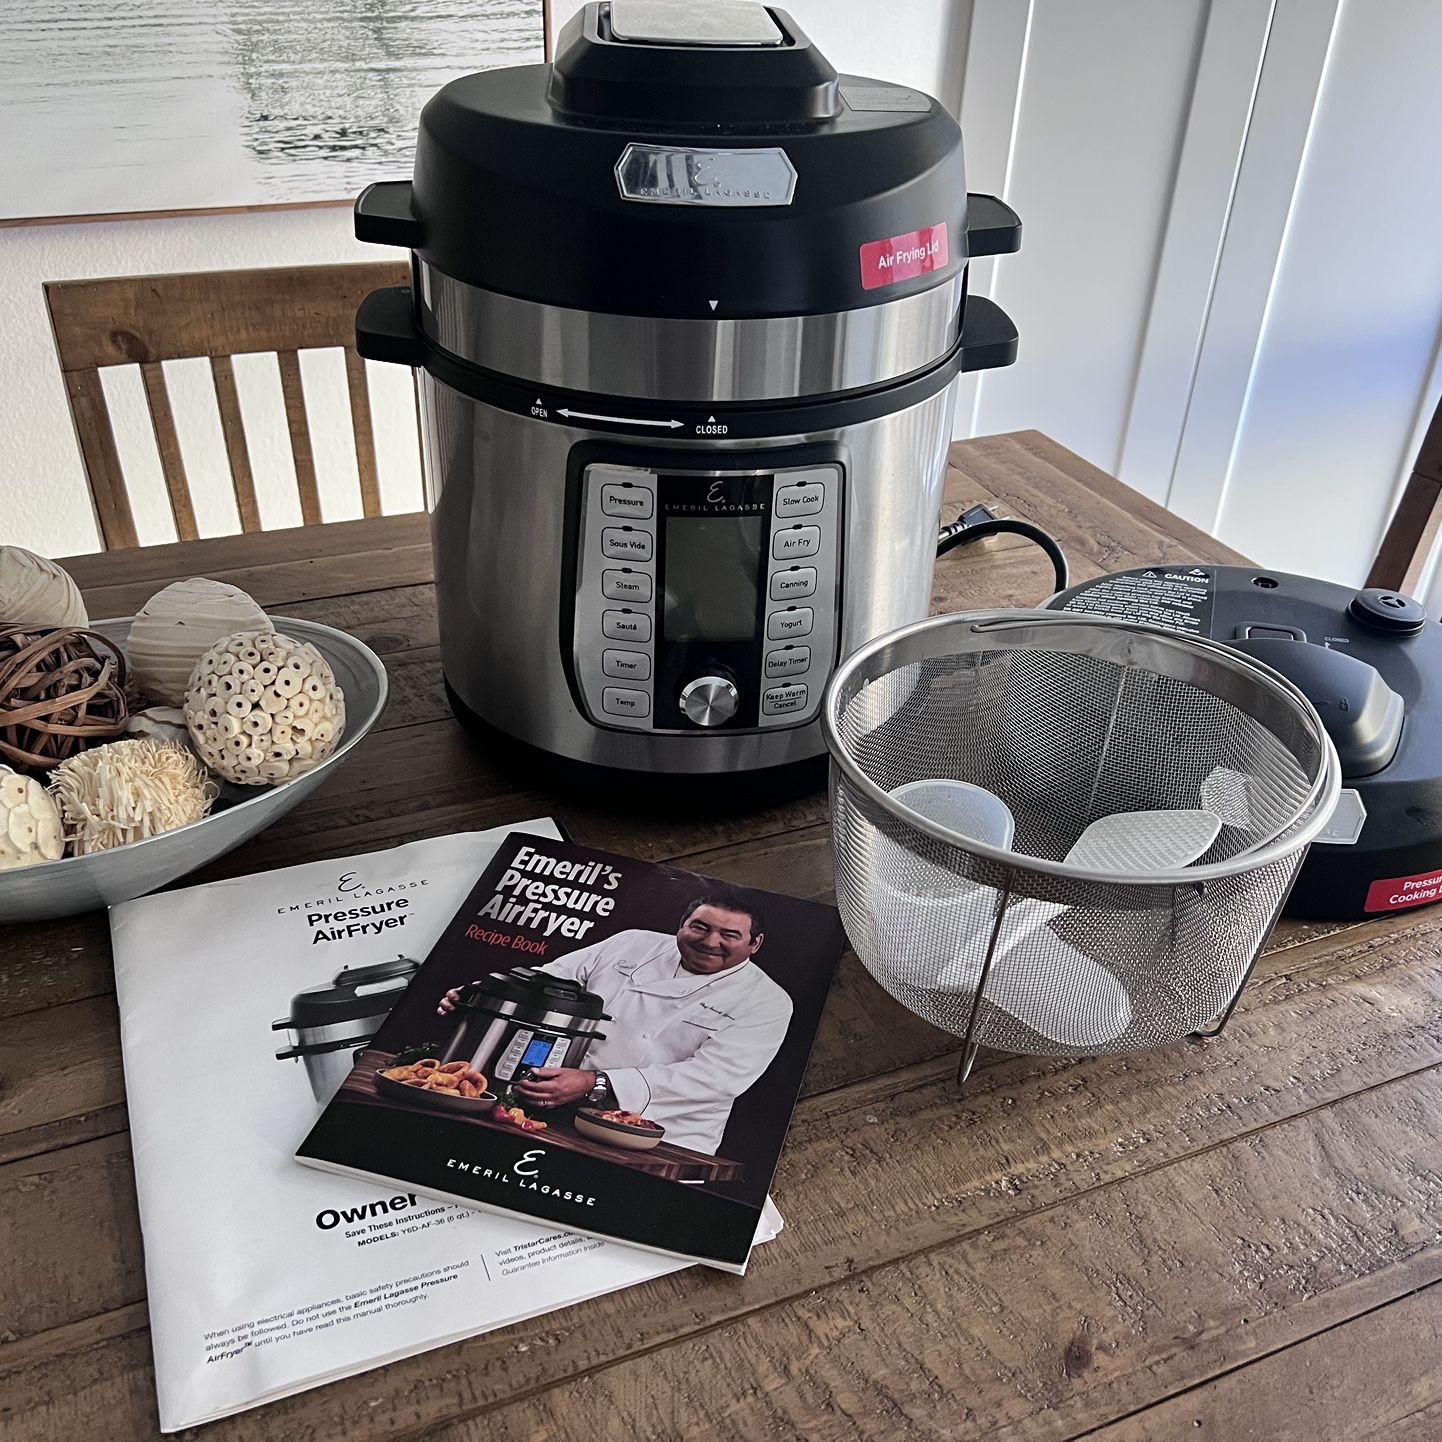 How to Use the Pressure Cooking Lid  Emeril Lagasse Pressure AirFryer 